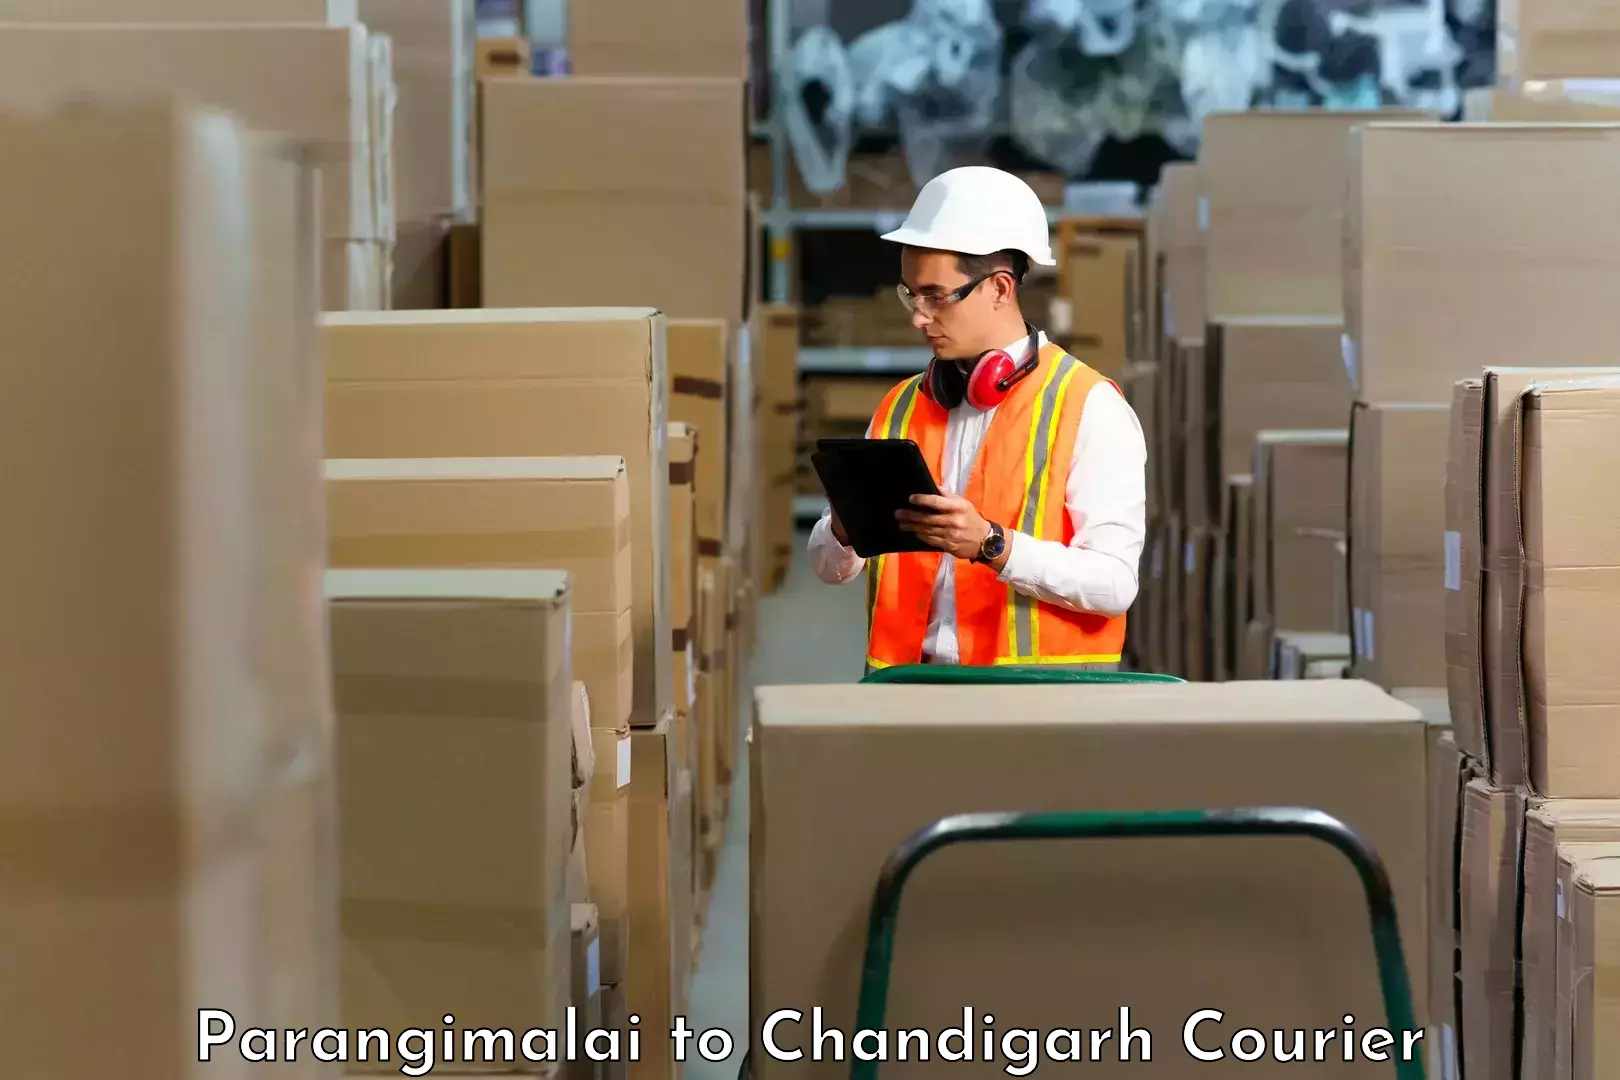 Personalized courier experiences Parangimalai to Chandigarh